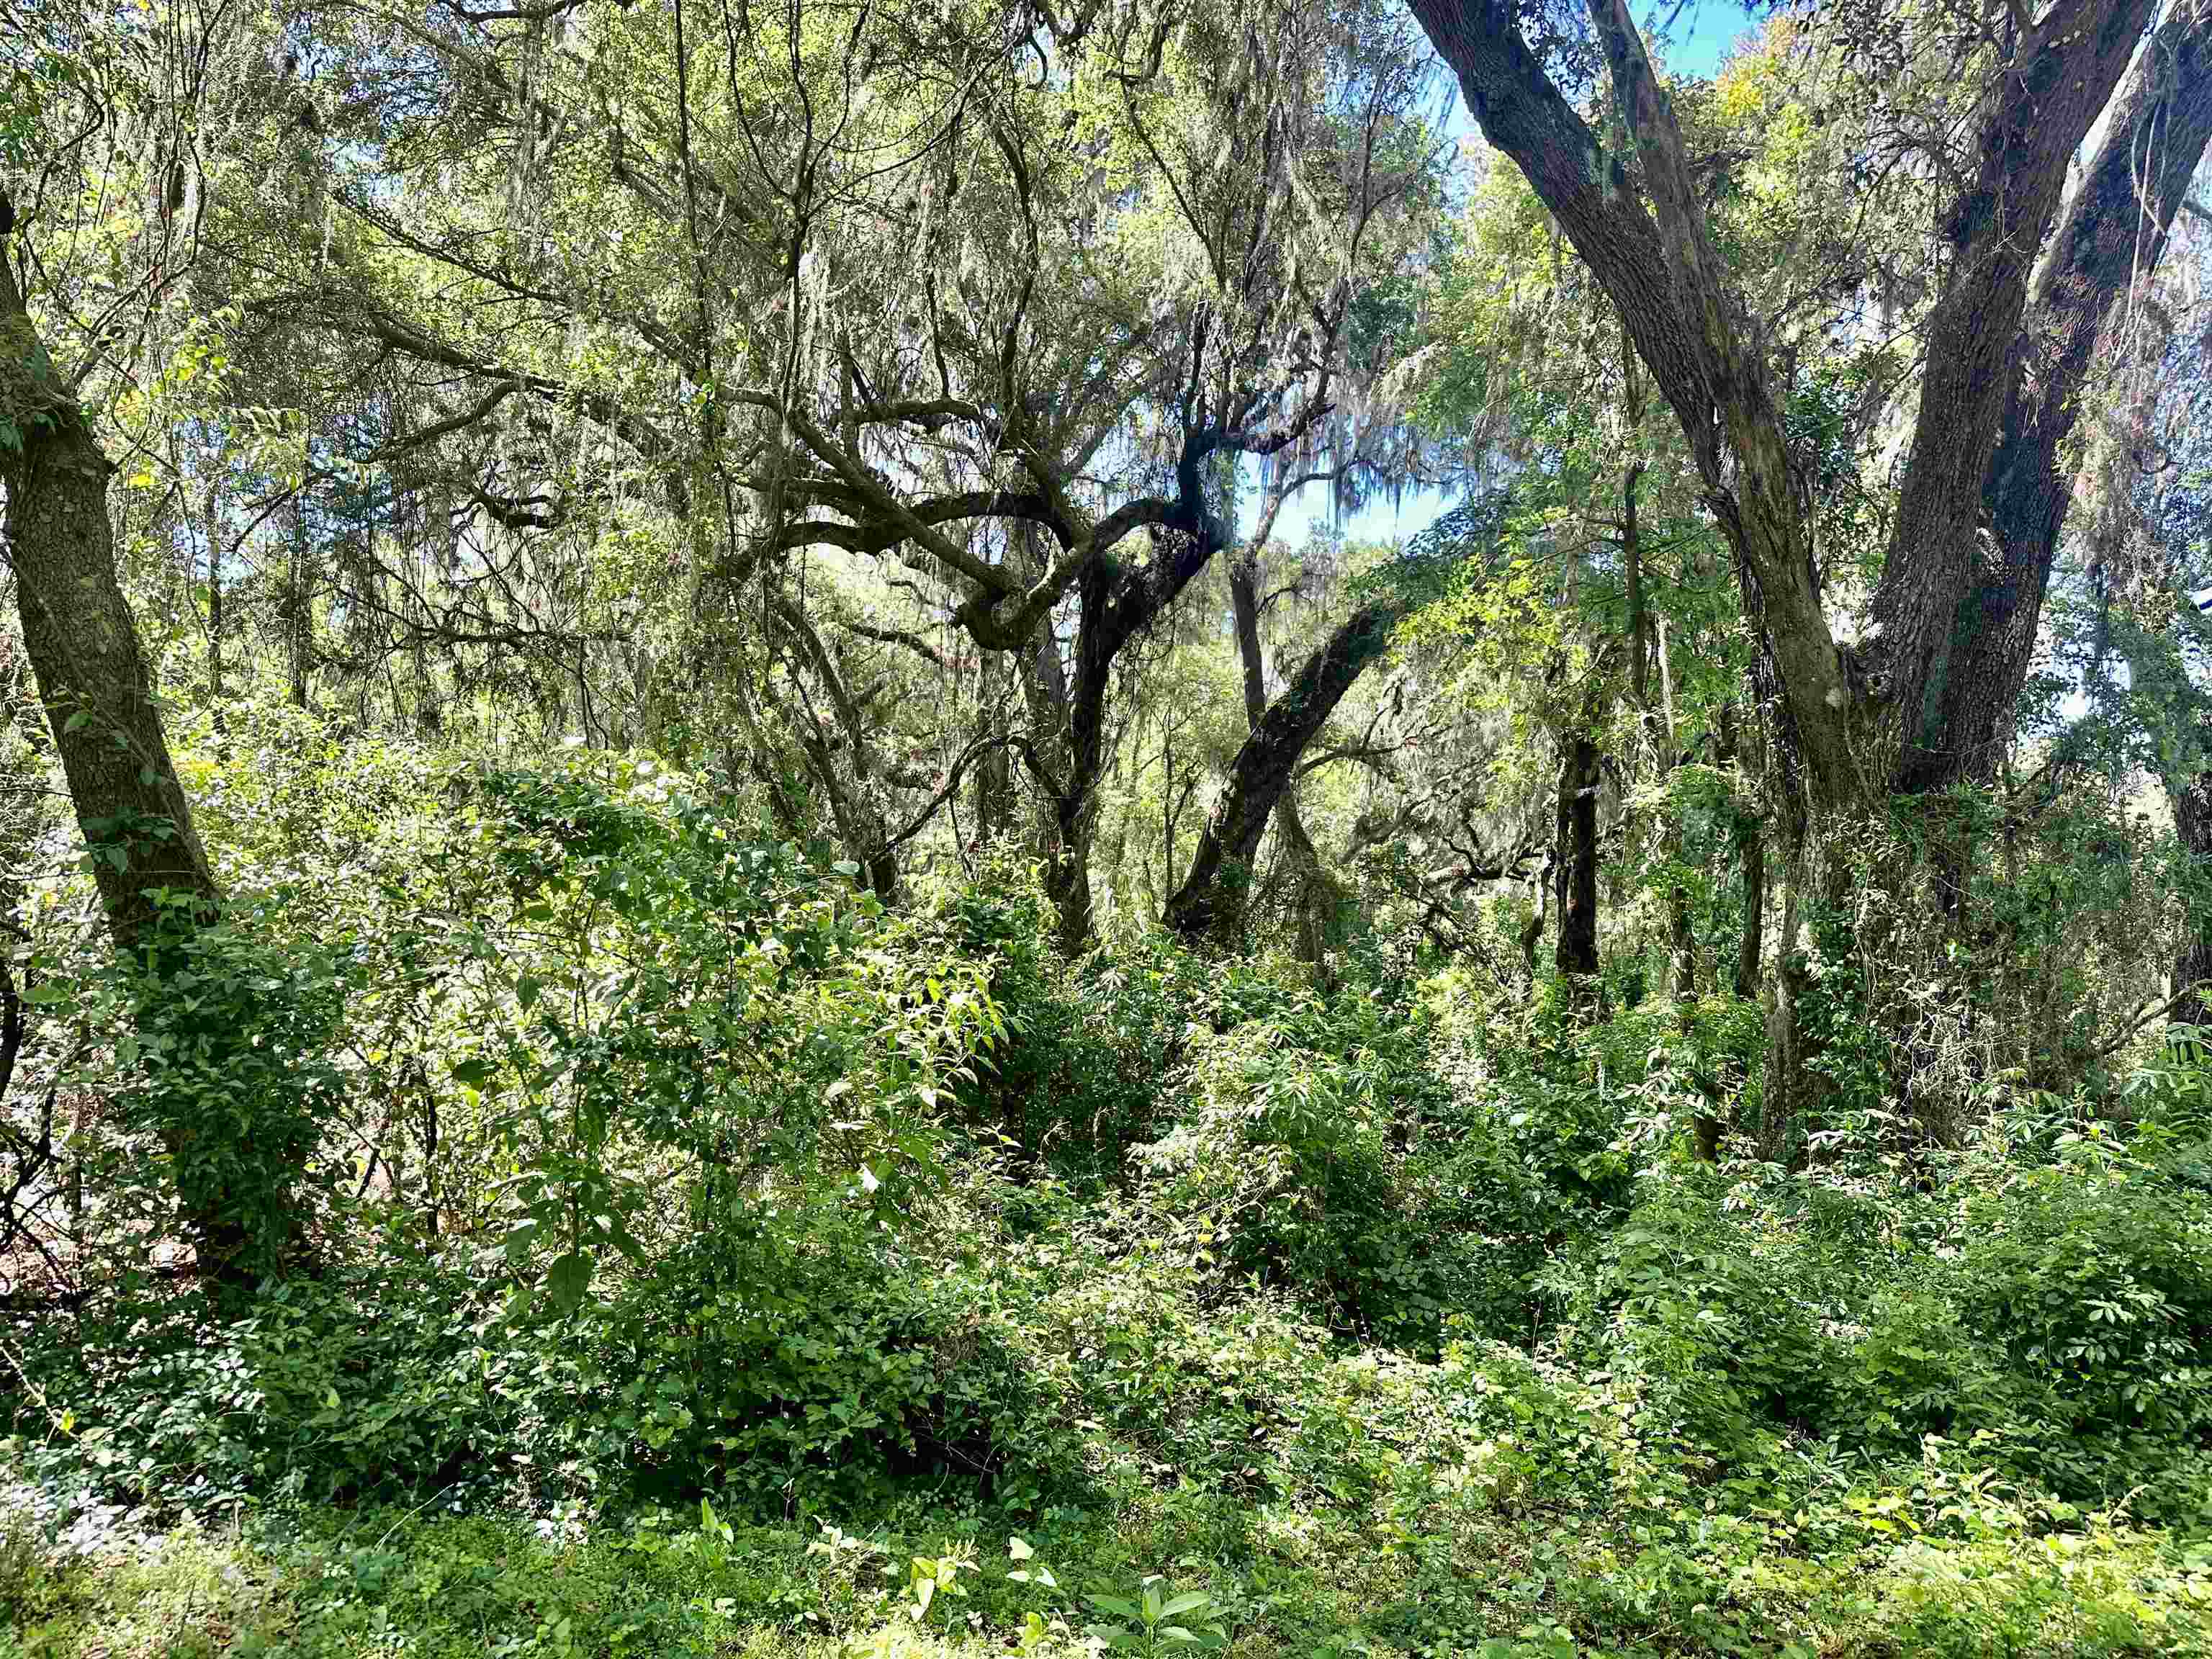 000 Rocky Ford,MADISON,Florida 32340,Lots and land,Rocky Ford,364622